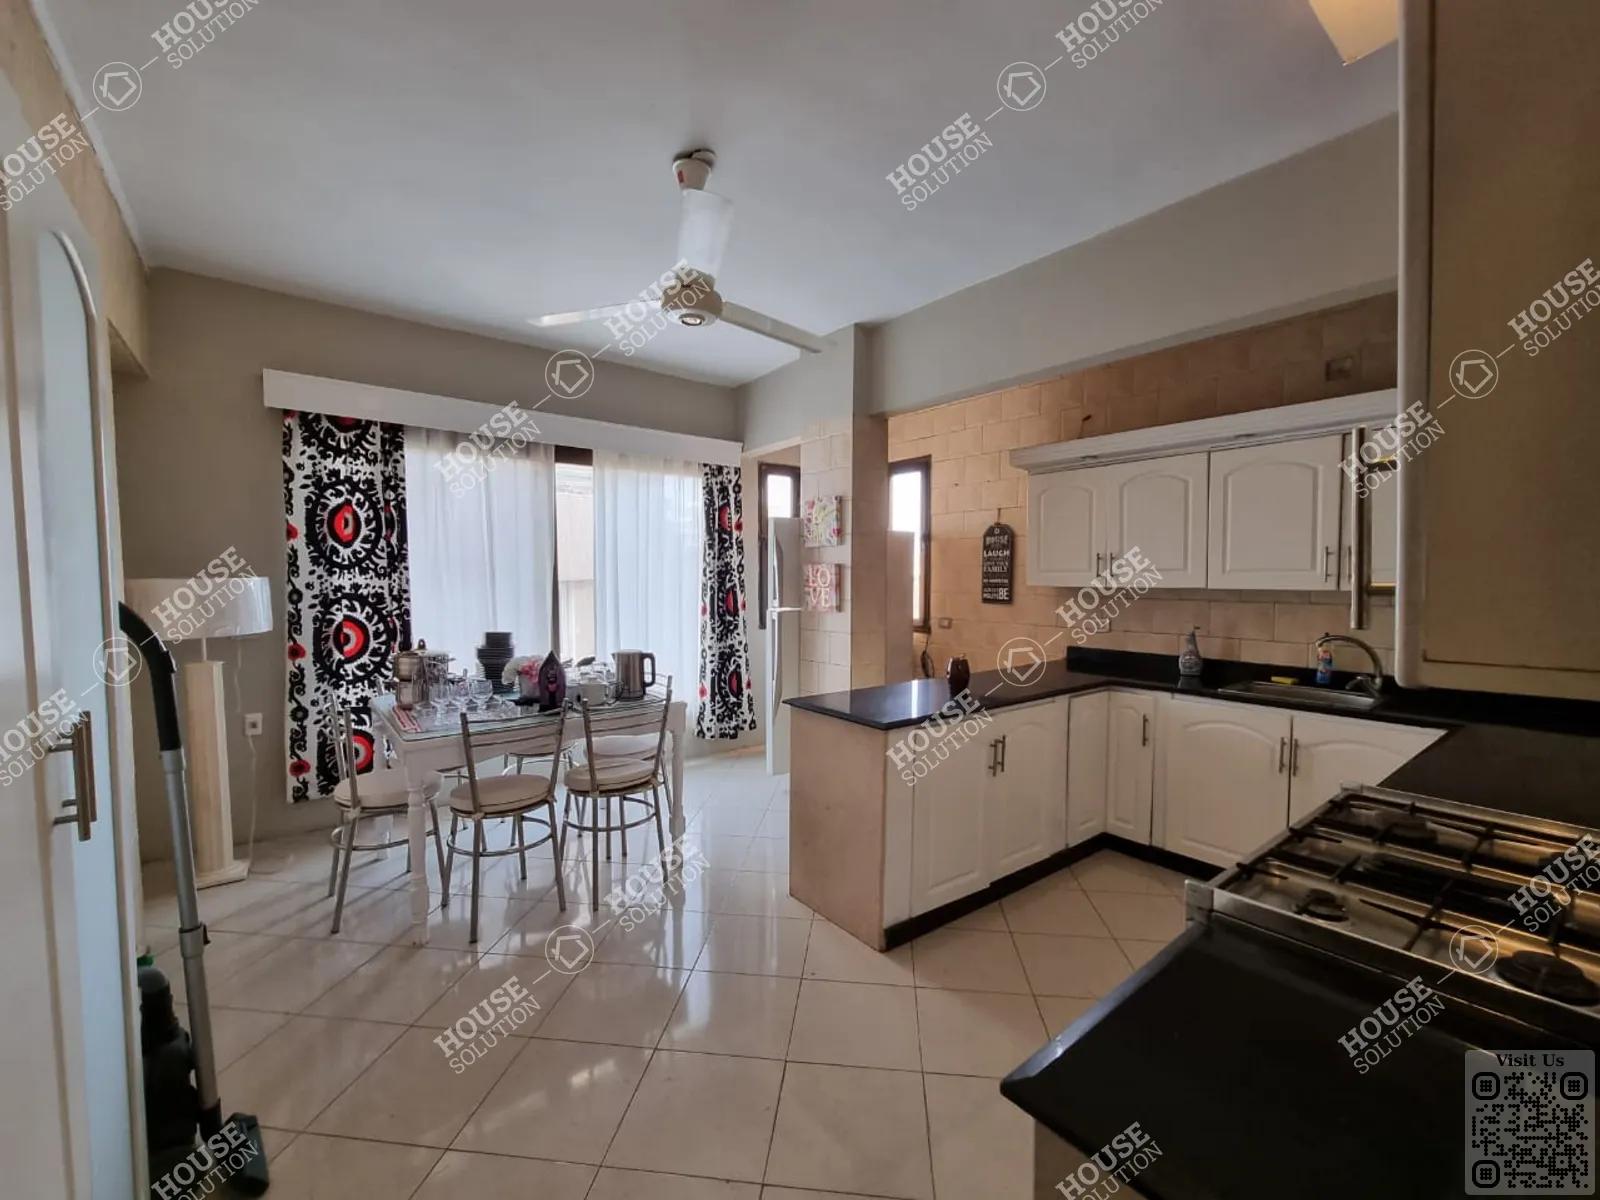 KITCHEN  @ Apartments For Rent In Maadi Maadi Degla Area: 300 m² consists of 4 Bedrooms 3 Bathrooms Modern furnished 5 stars #4803-1